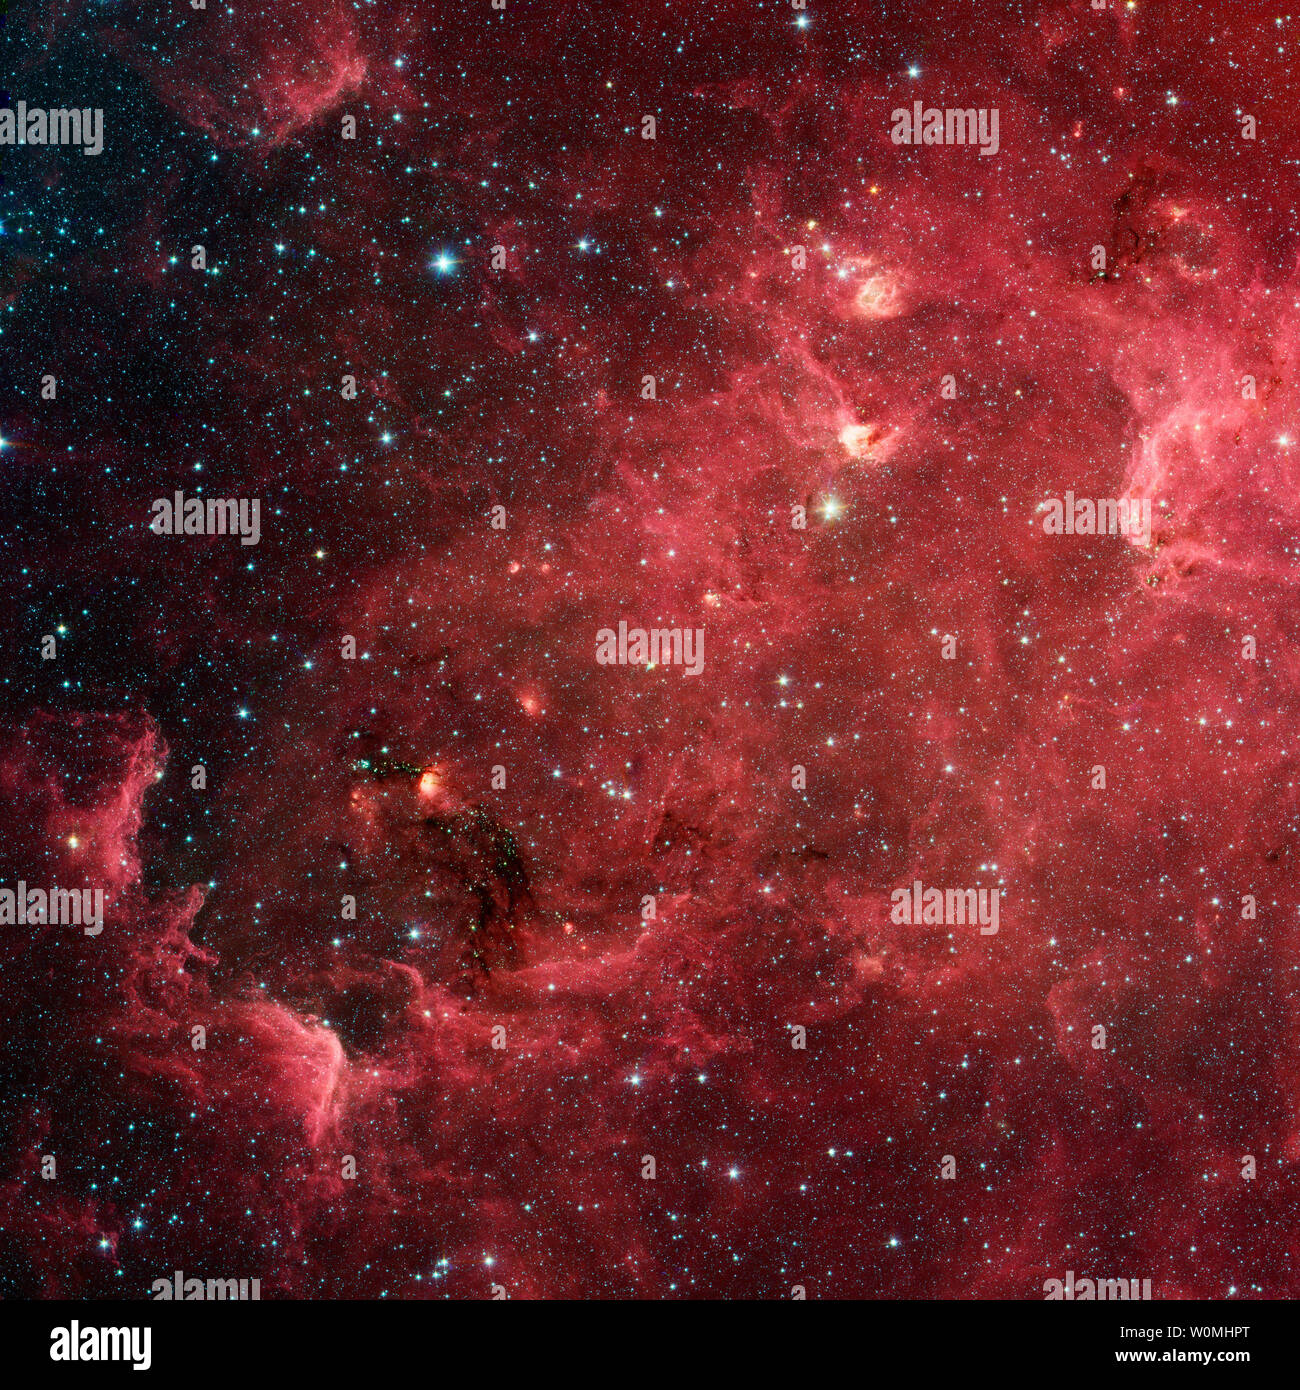 This swirling landscape of stars is known as the North America Nebula. In visible light, the region resembles North America, but in this new infrared view from NASA's Spitzer Space Telescope, the continent disappears.   UPI/NASA/JPL-Caltech Stock Photo